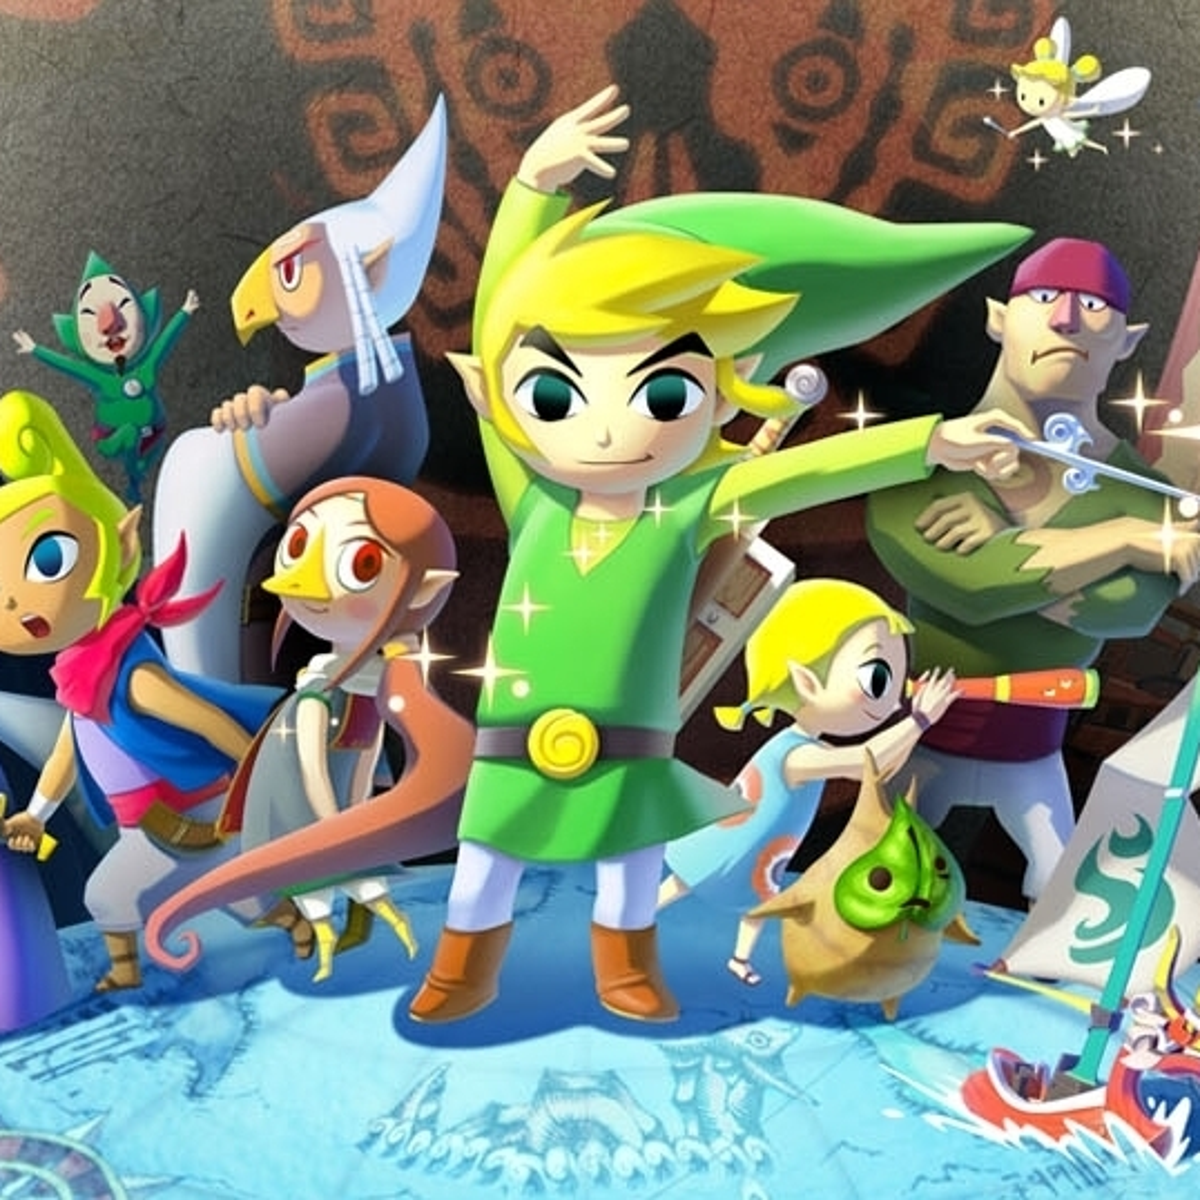 September Nintendo Direct will reportedly confirm Wind Waker and